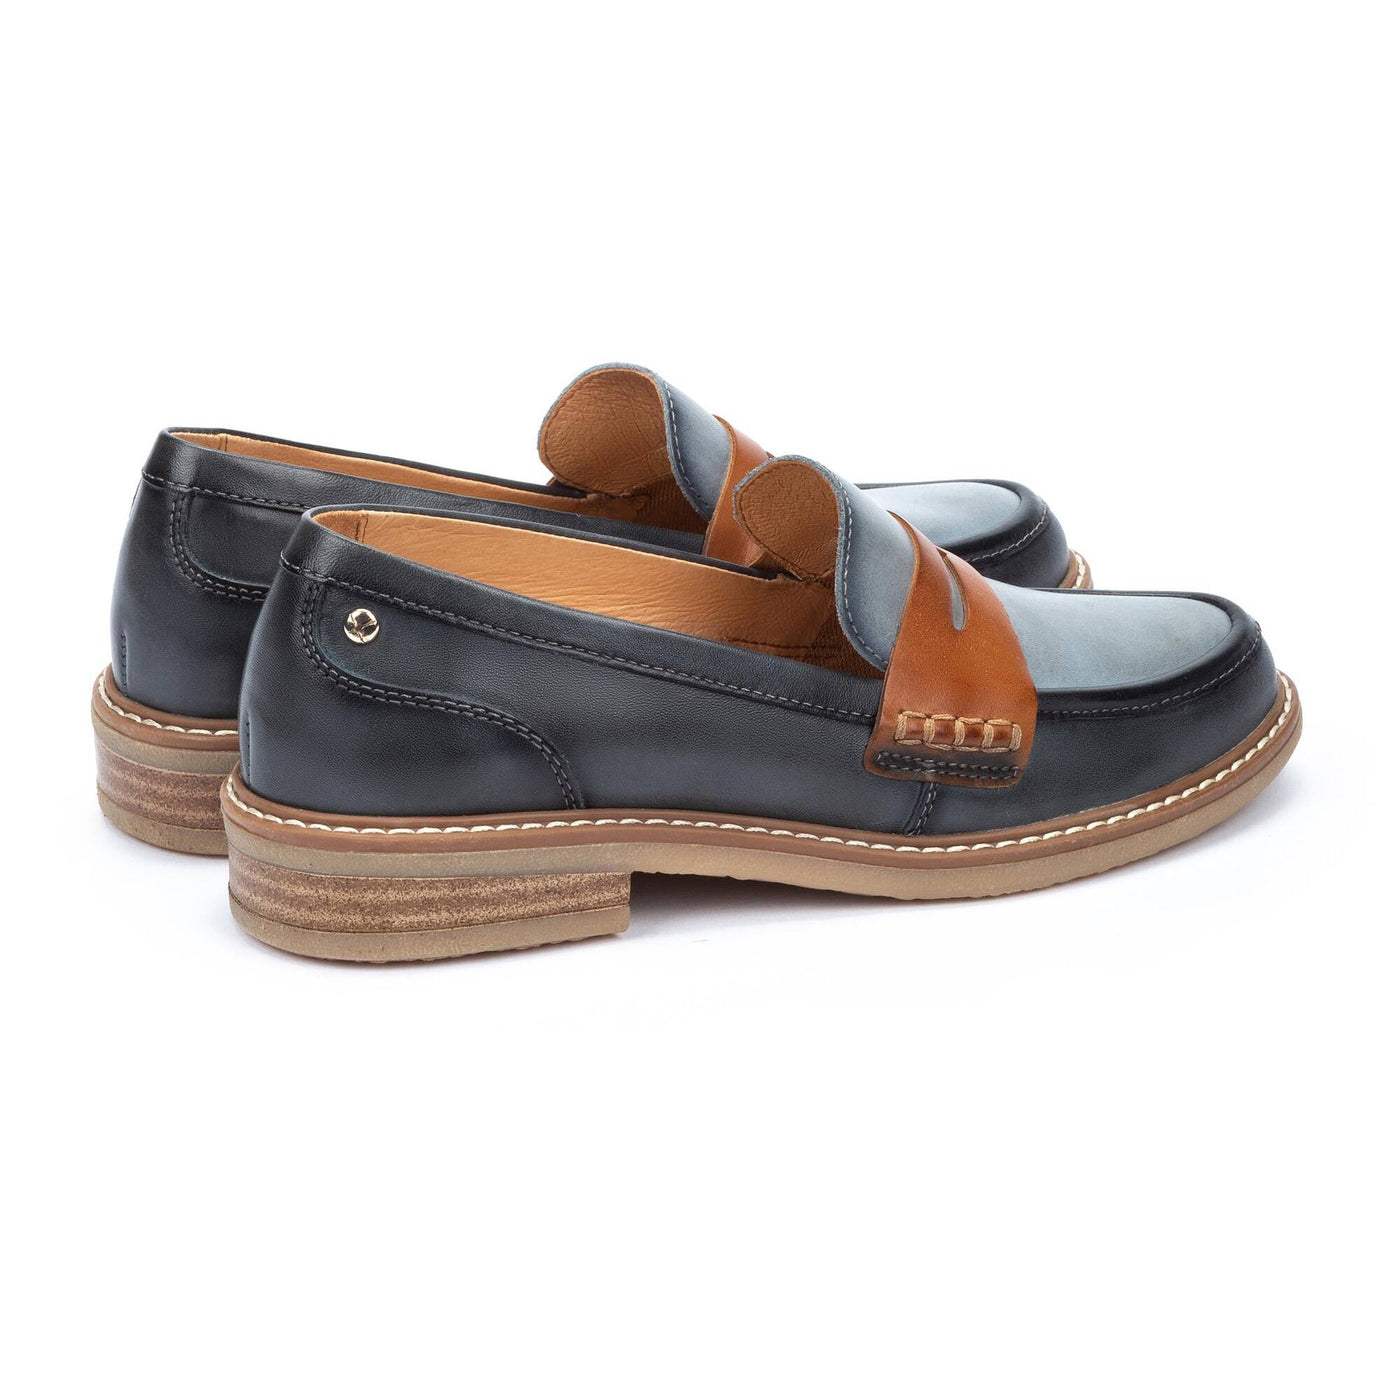 Aldaya Two-Tone Penny Loafer